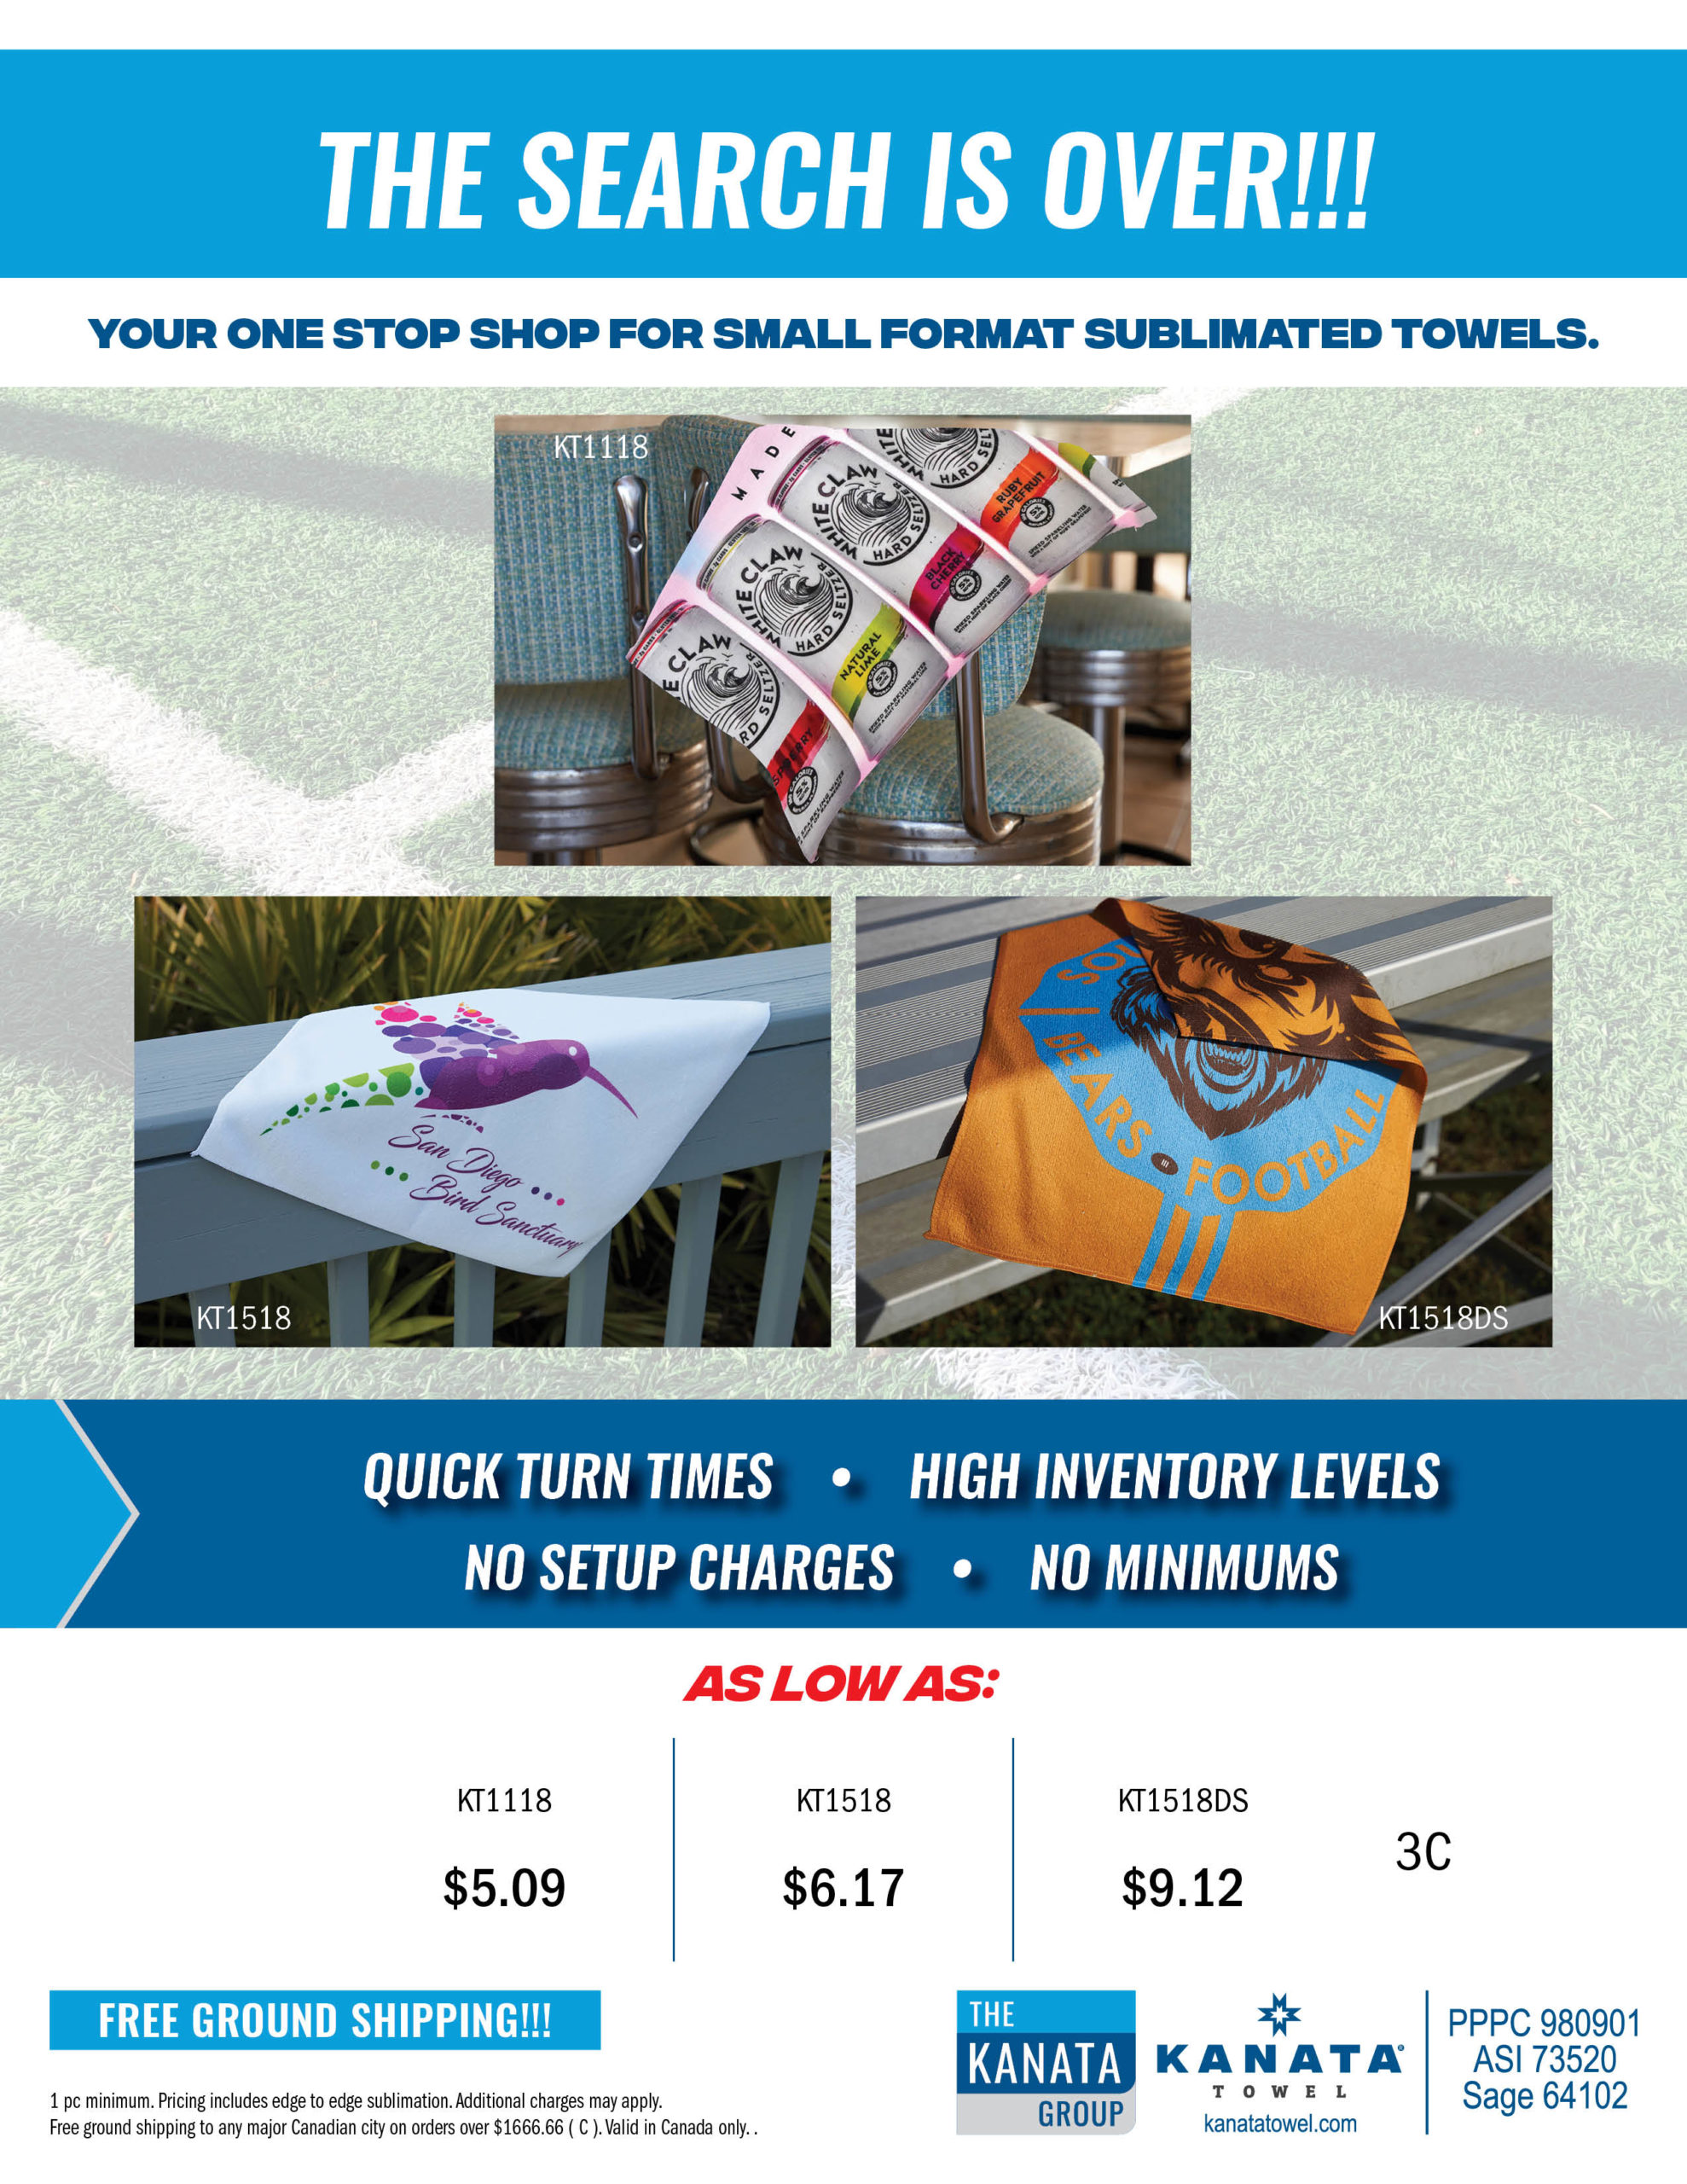 Small Format Sublimated Towels